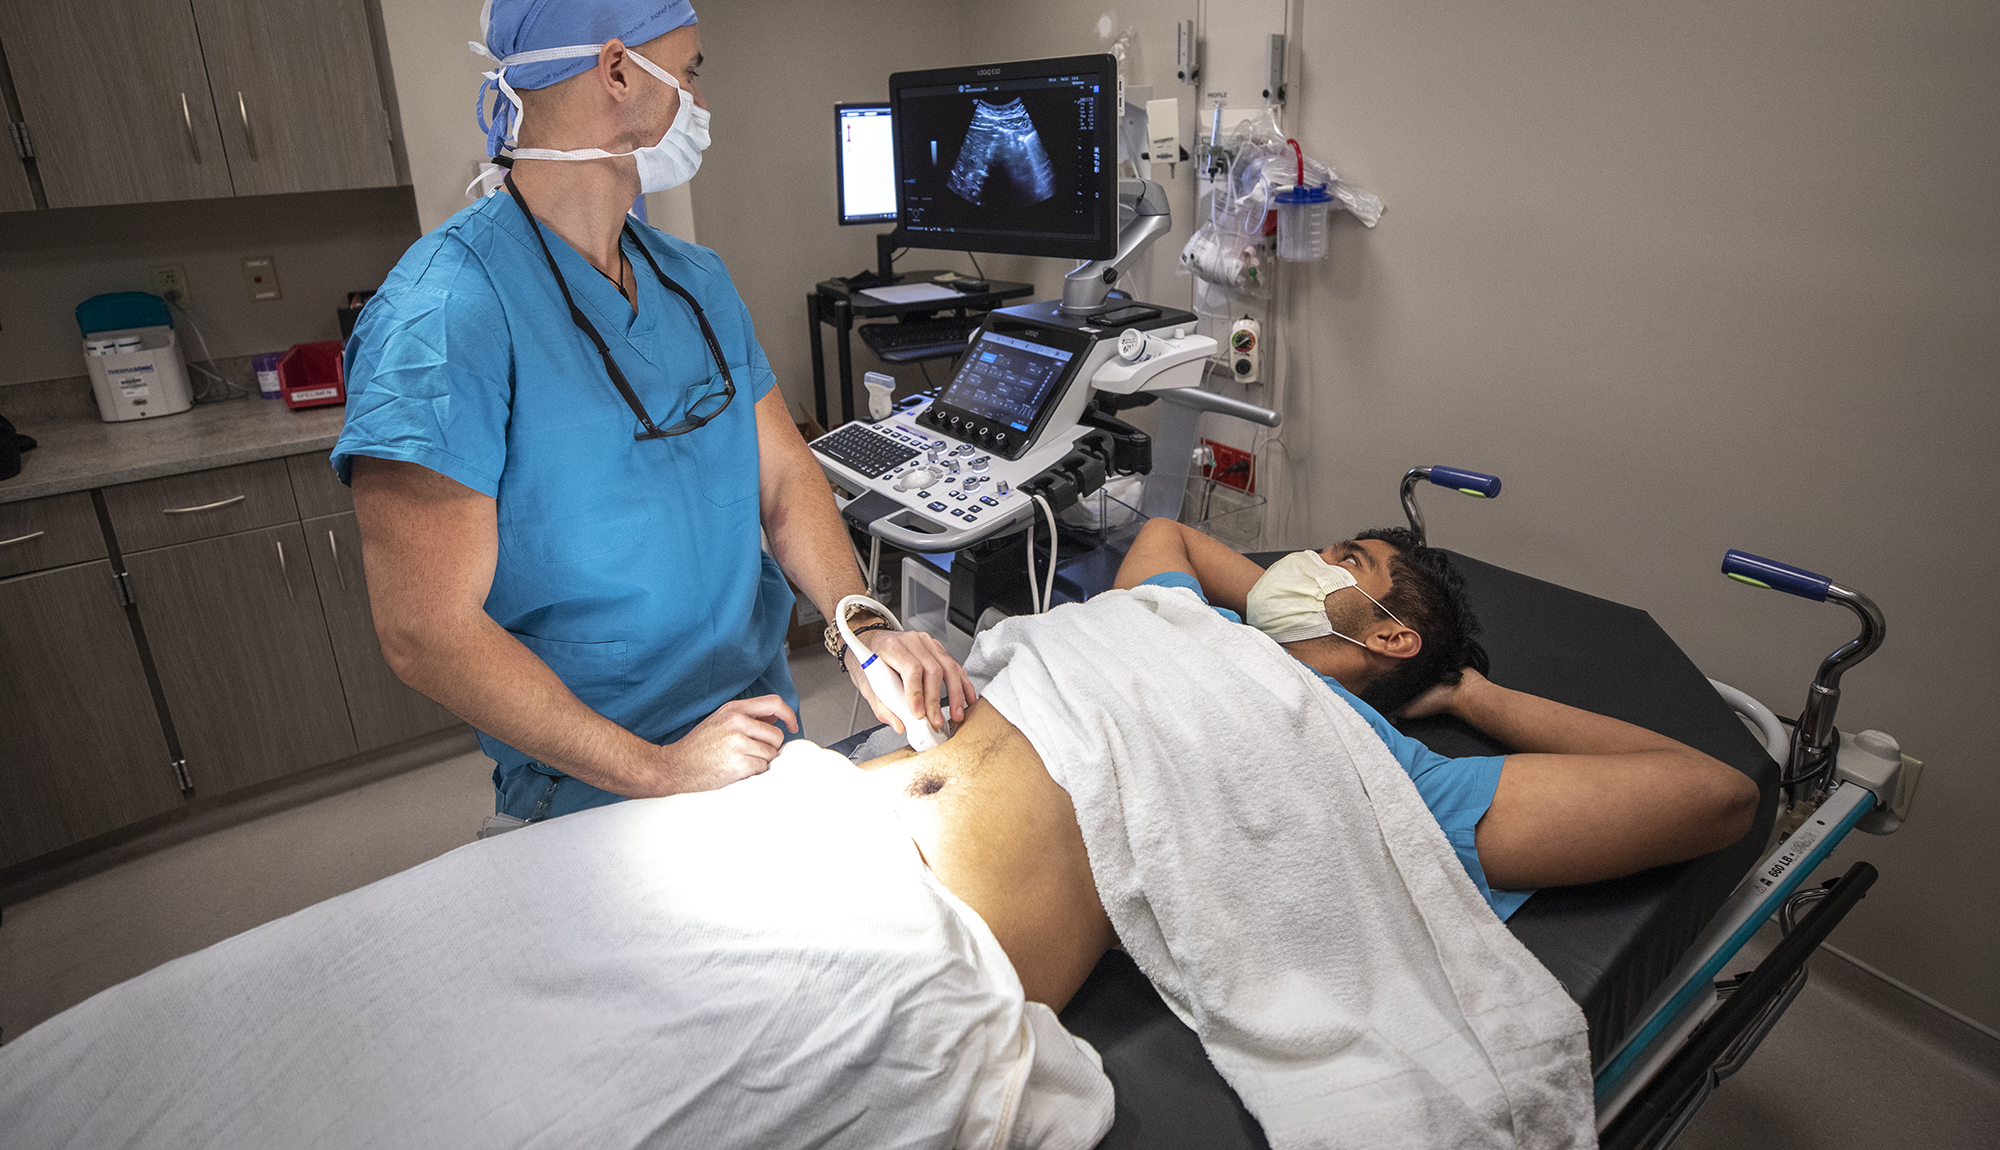 Radiologist performing ultrasound on a patient's abdomen